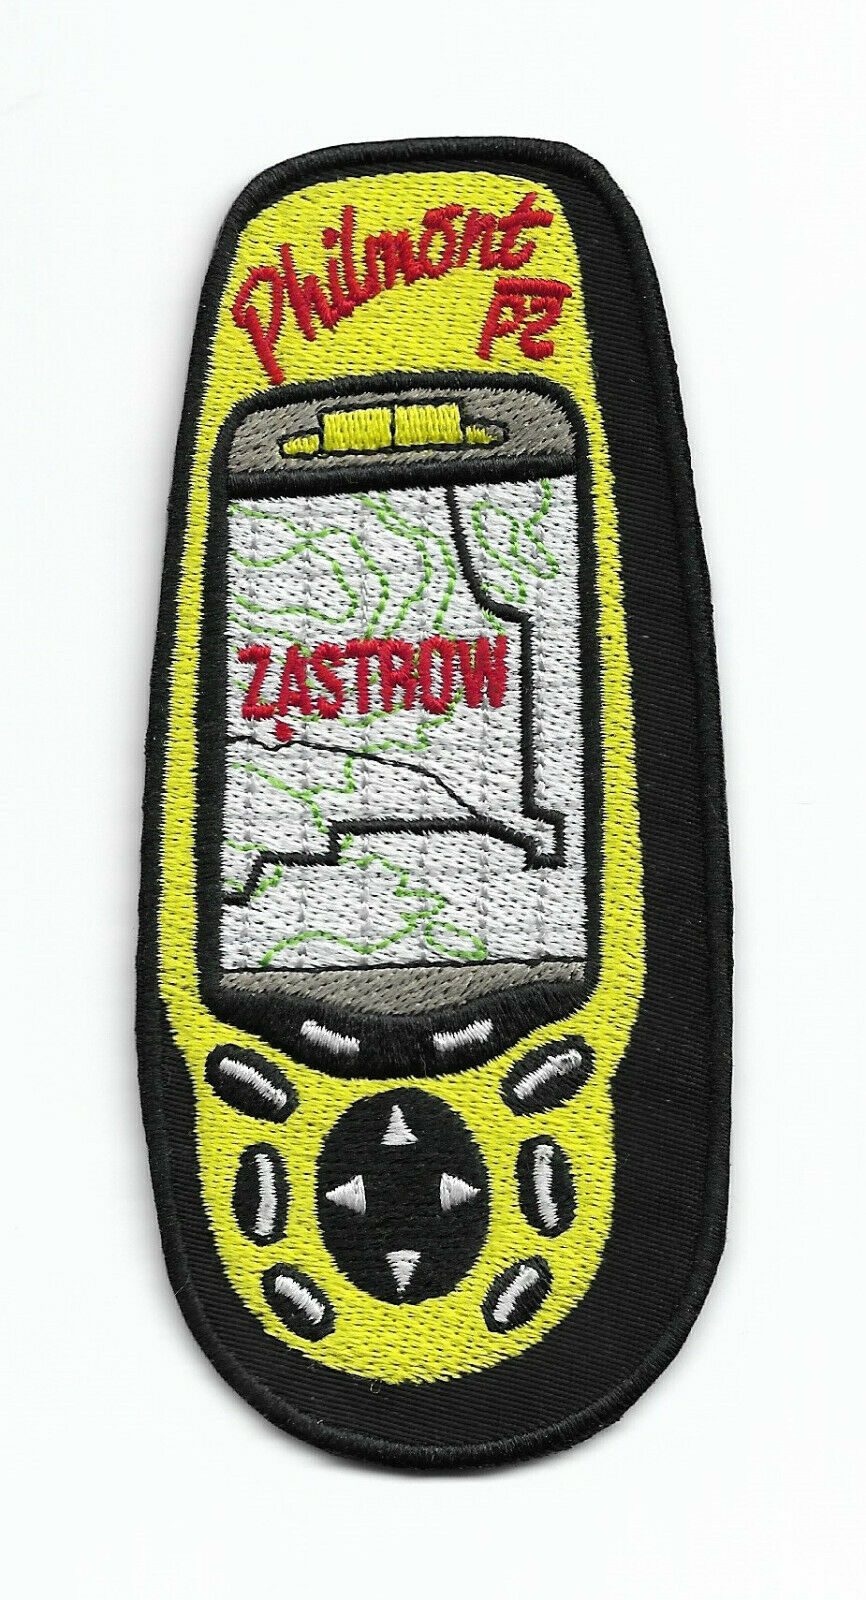 Philmont Scout Ranch * Zastrow Camp Patch # 1 * 2 Inch By 4 3/4 Inch